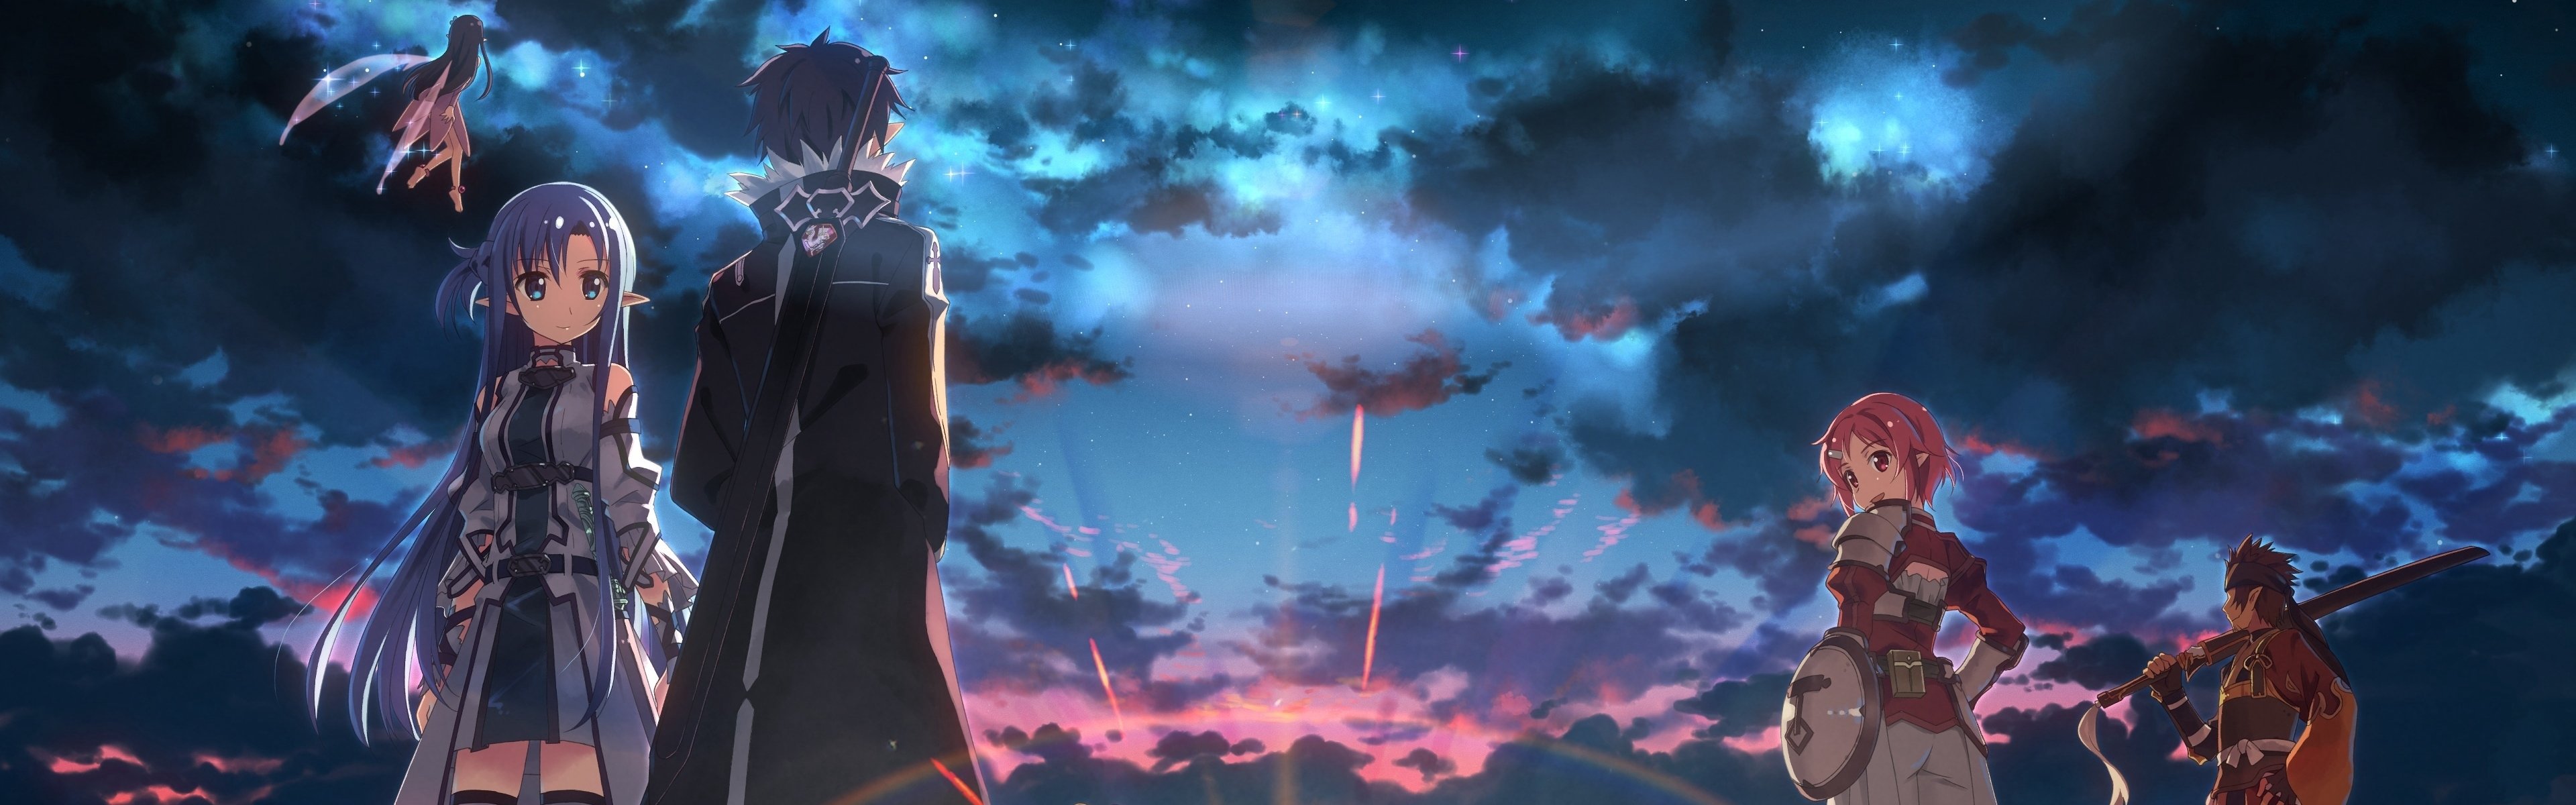 dual monitor wallpaper anime images (33) - HD Wallpapers Buzz